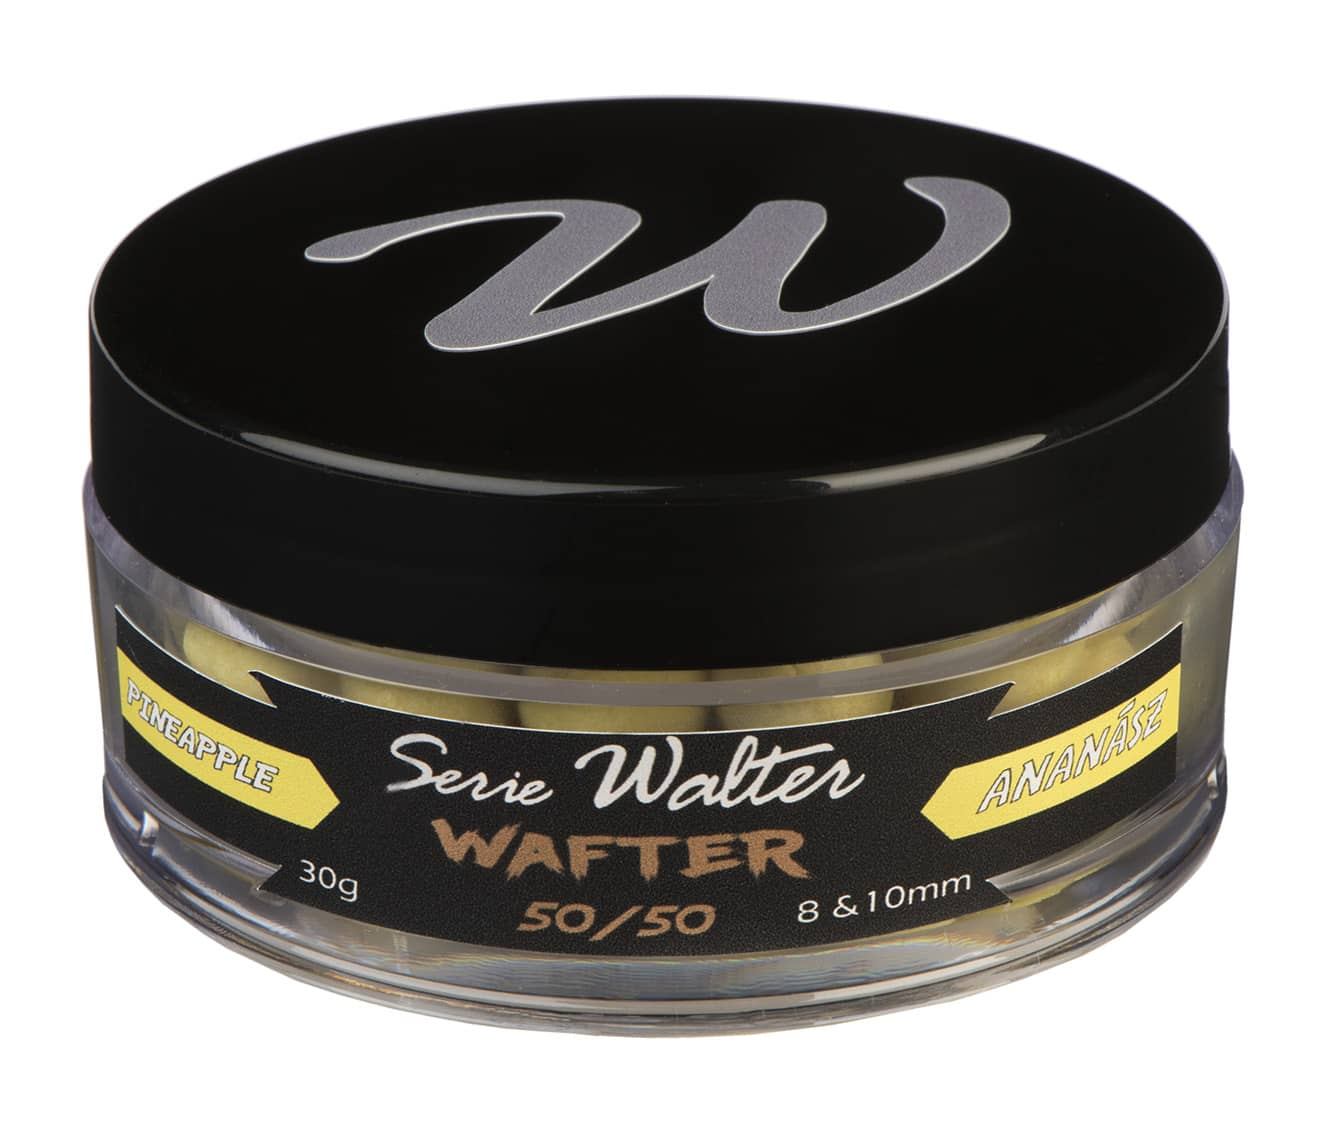 SERIE WALTER WAFTER 8-10MM PINEAPPLE